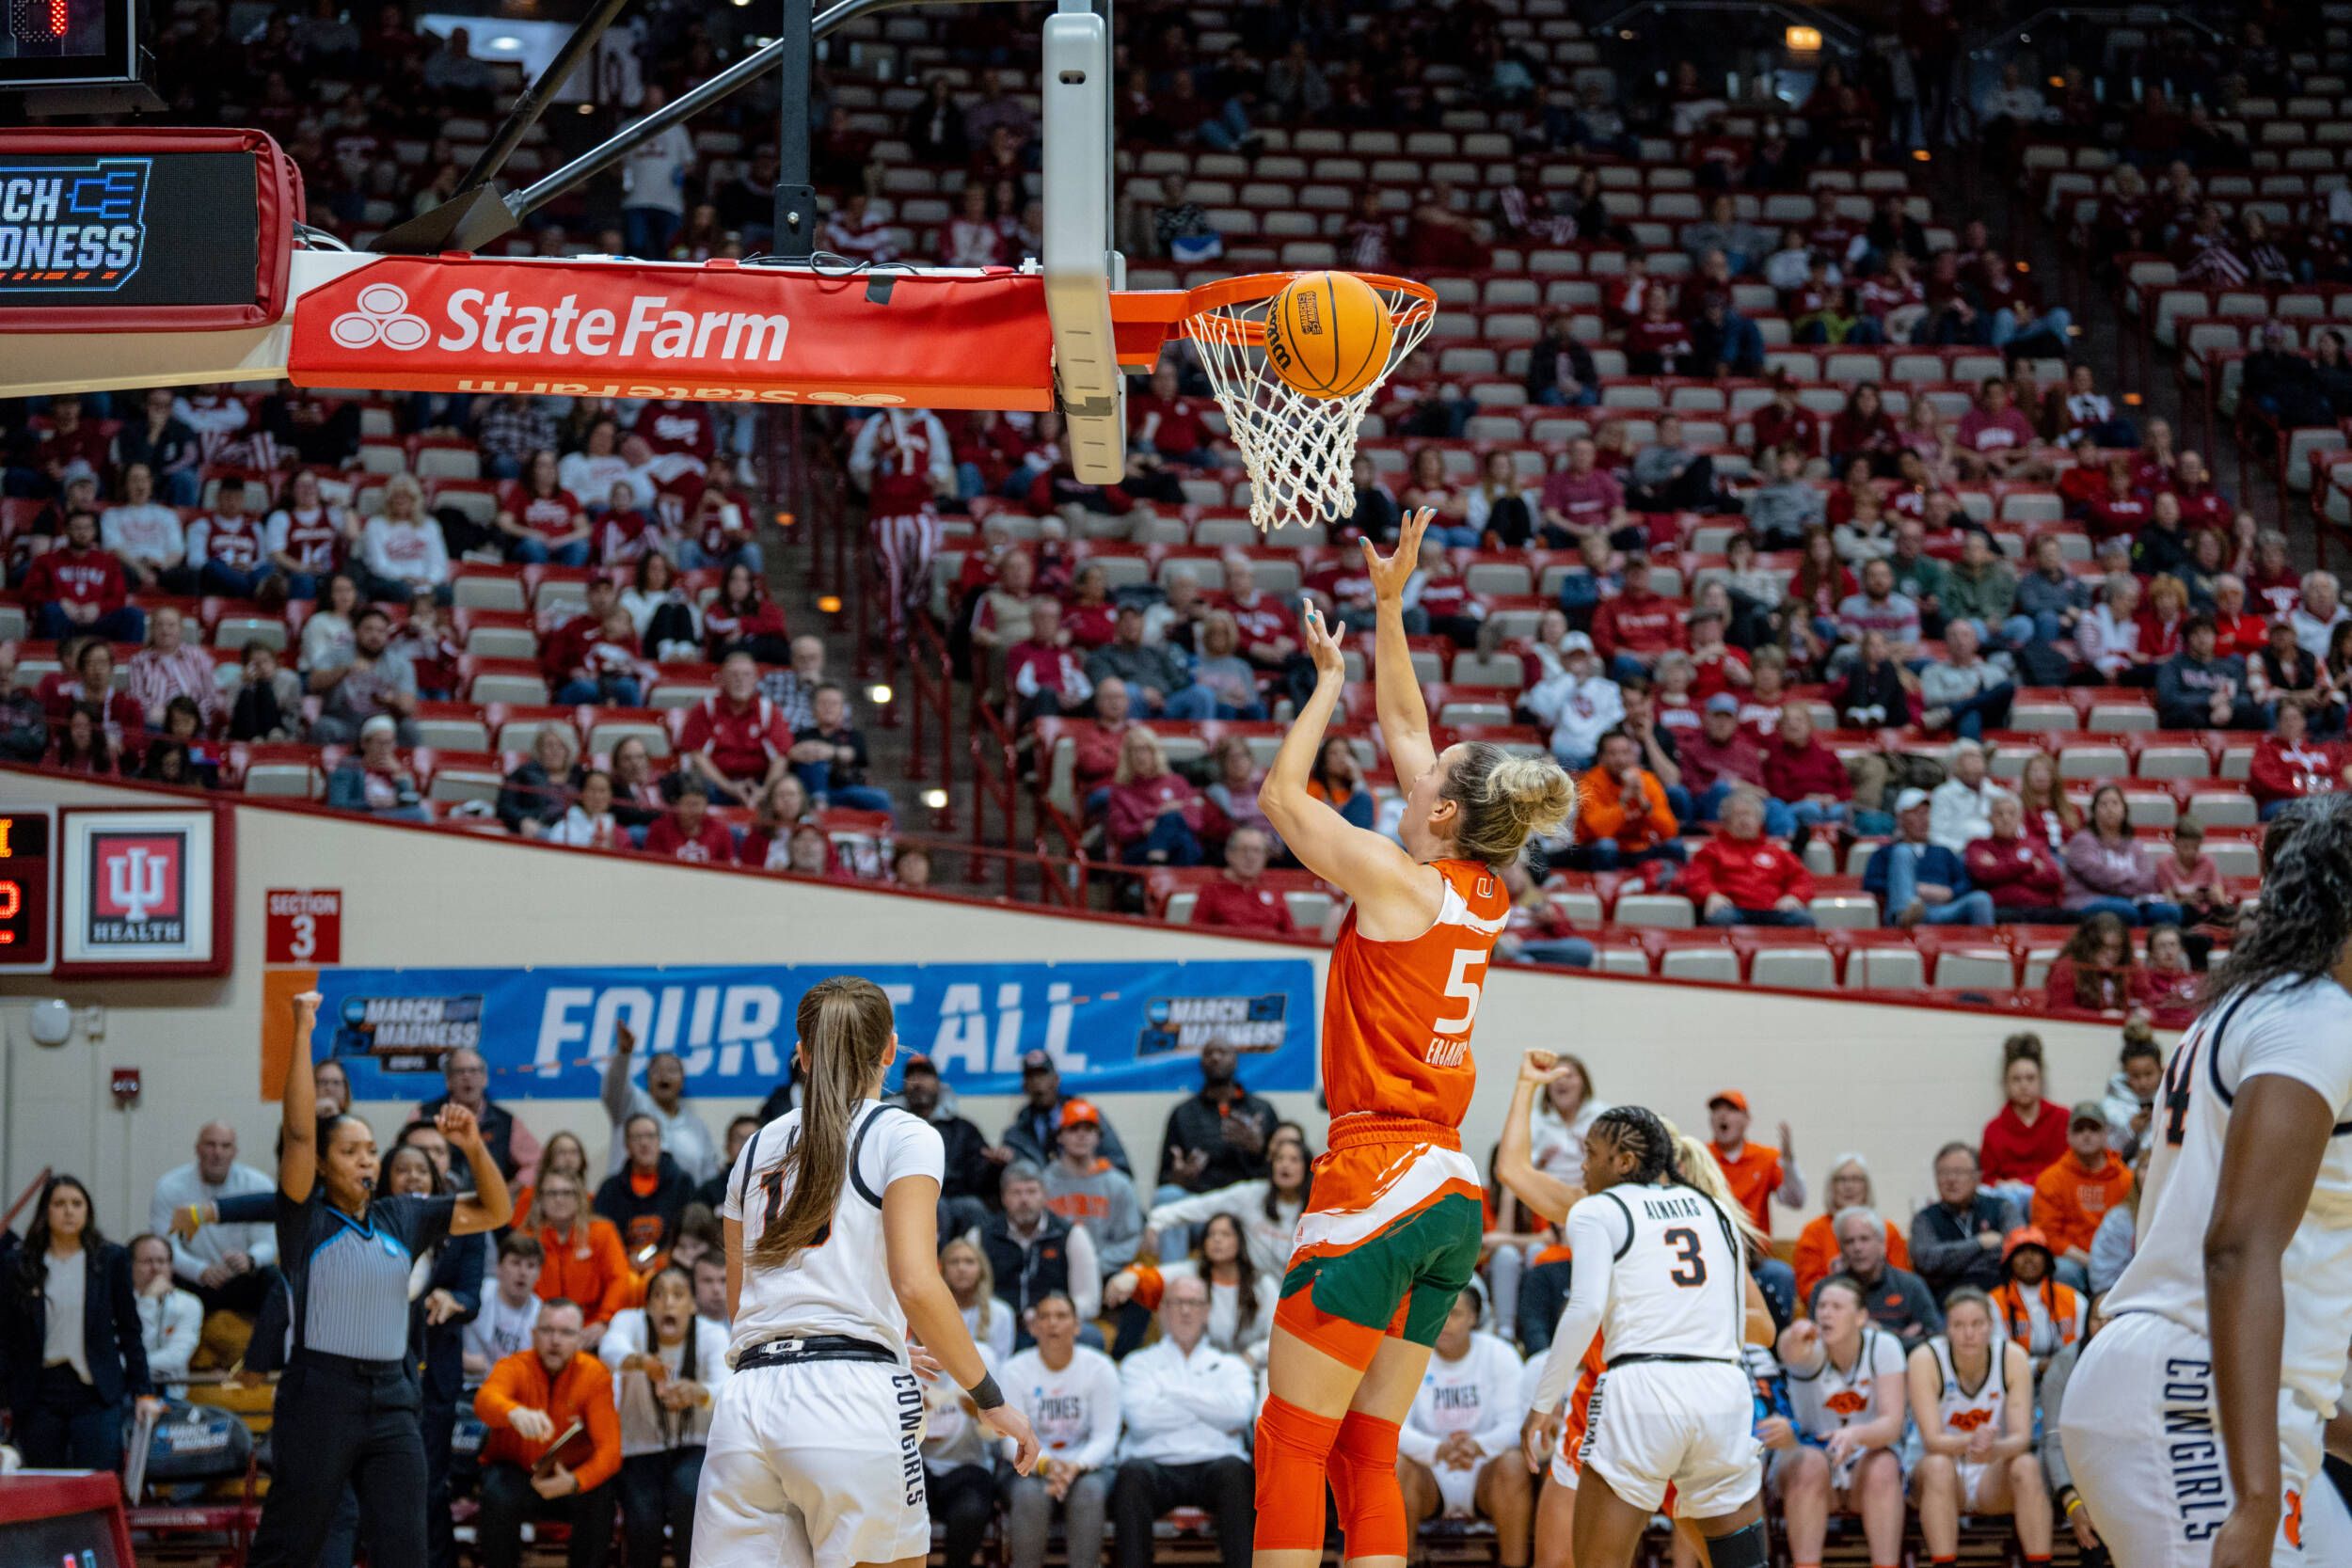 Miami women advance with thrilling win at NCAA tourney